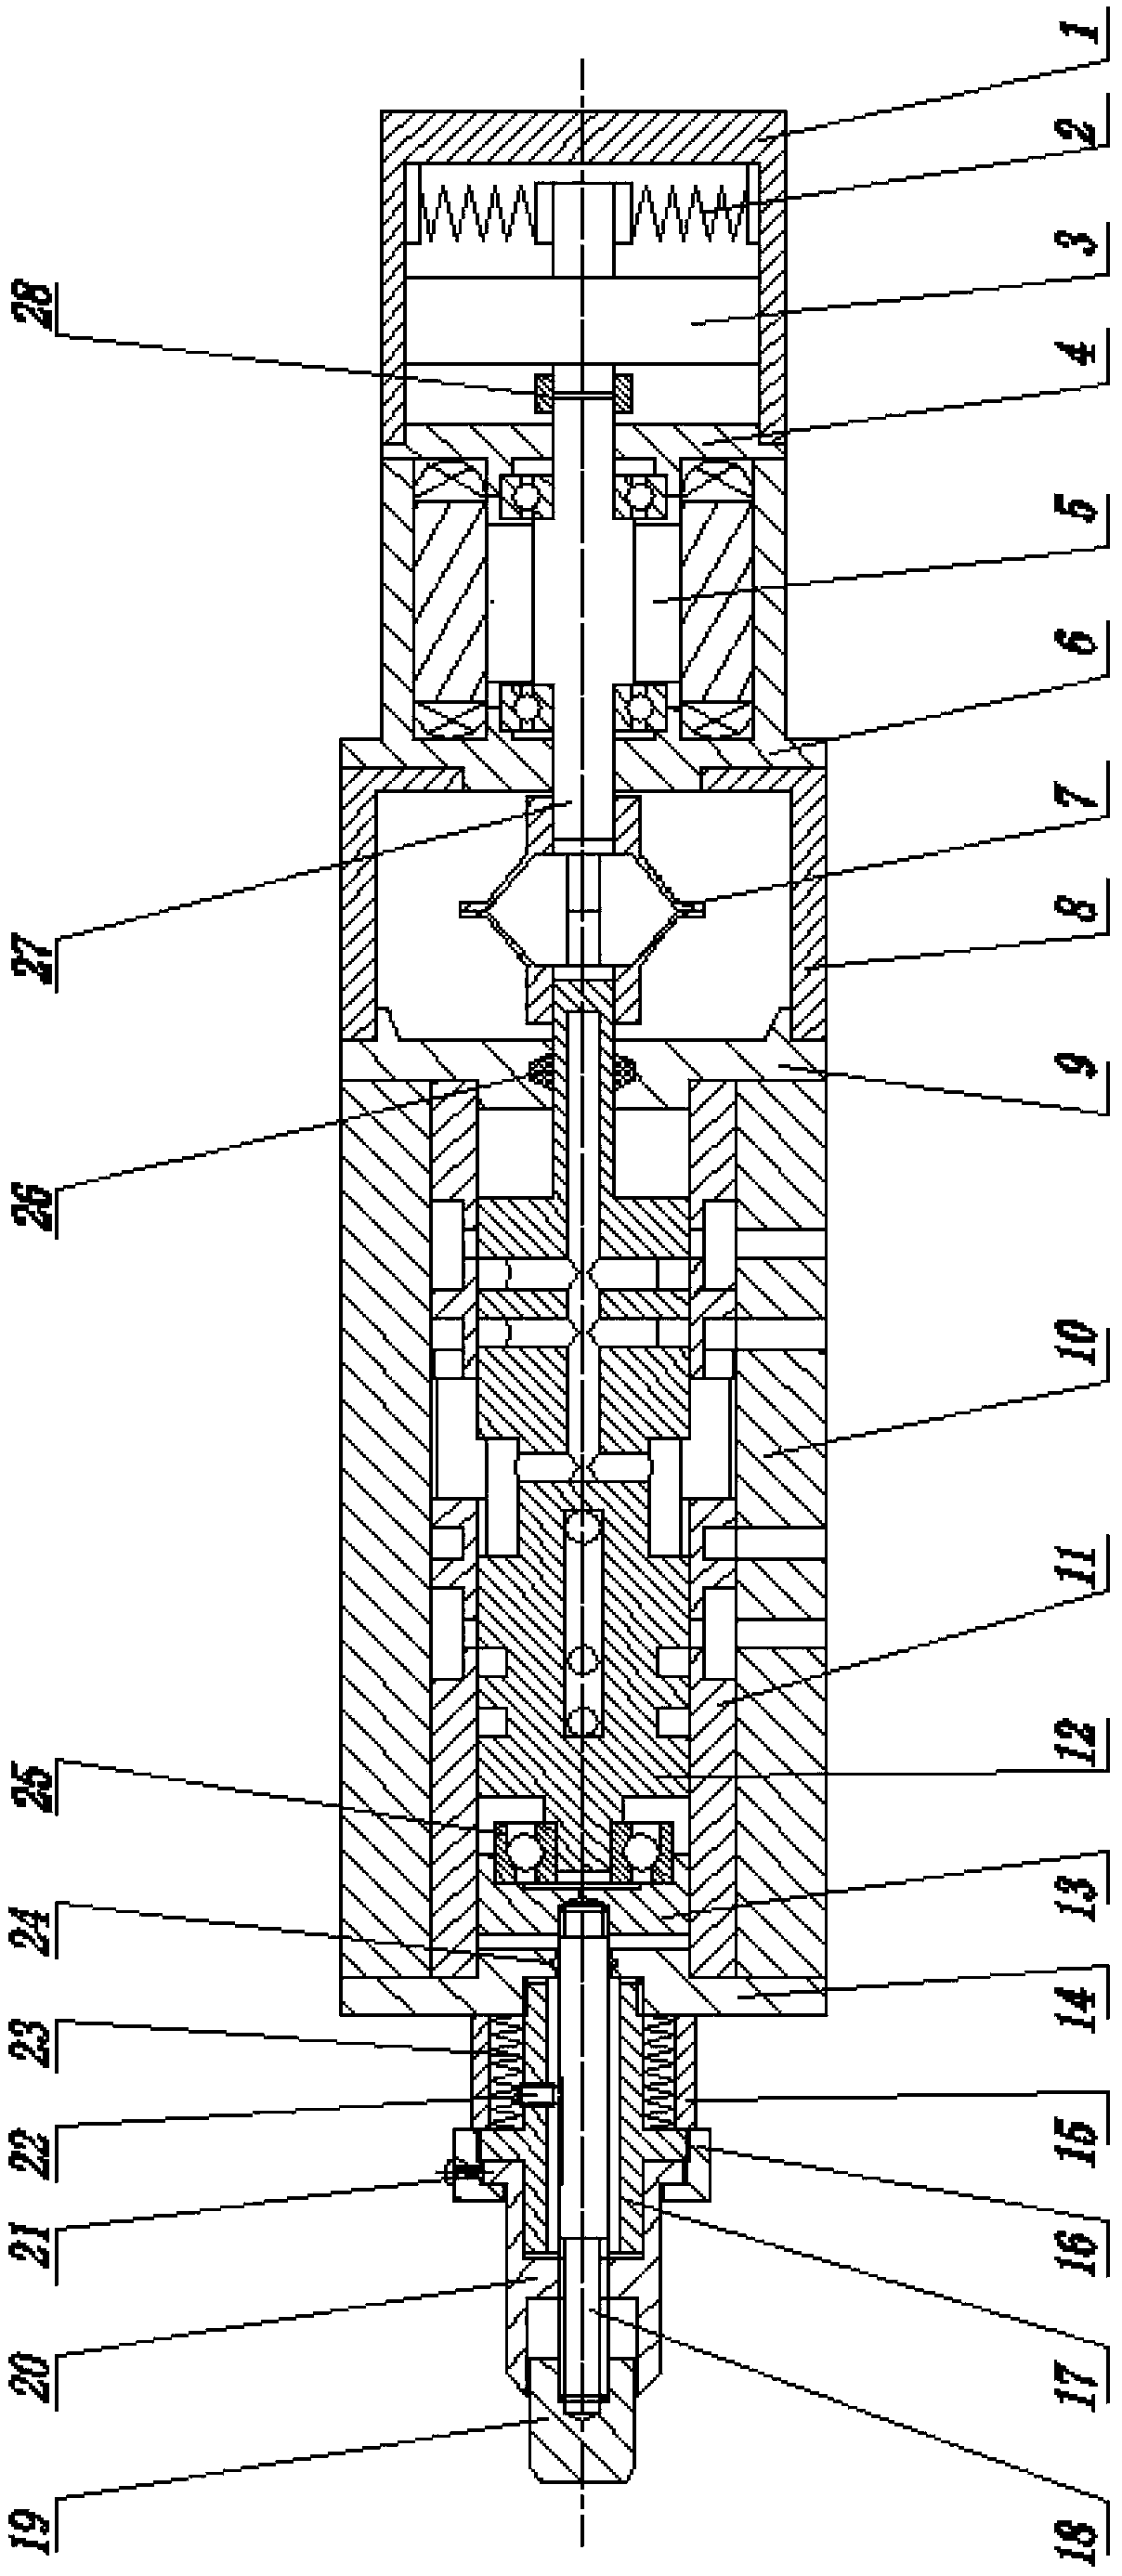 Rotating servo valve capable of realizing continuously and steplessly adjustable flow rate